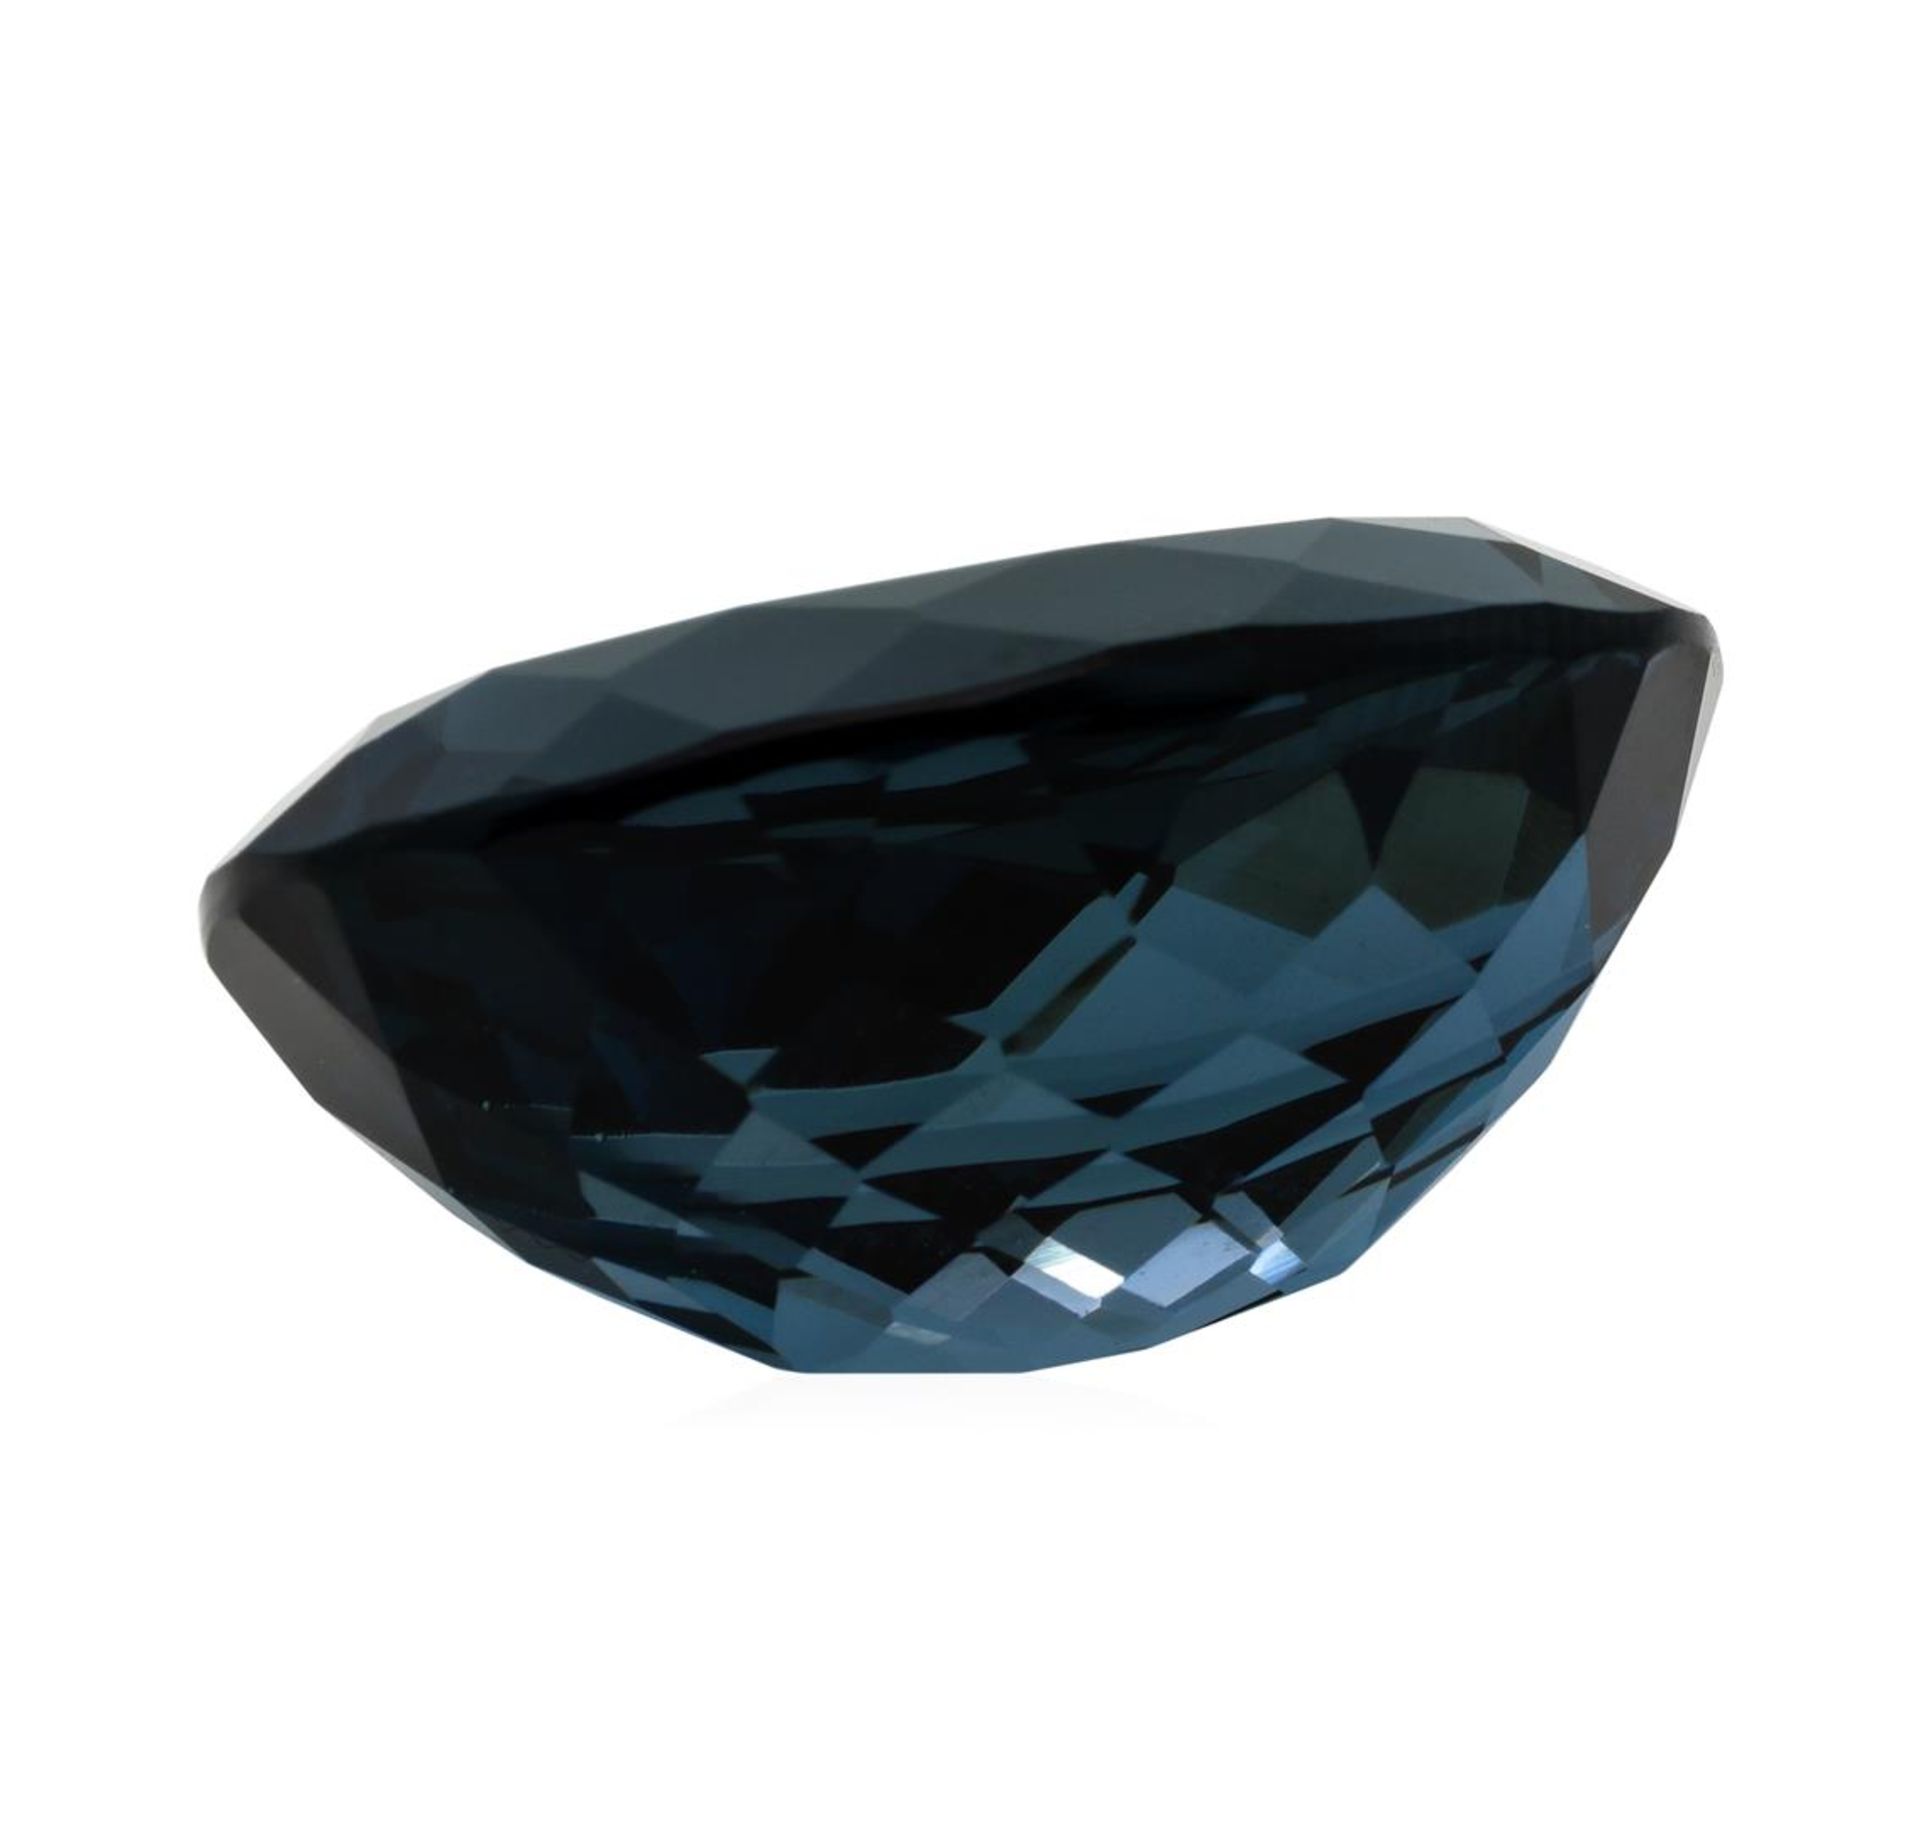 44.91ct. Natural Oval Cut London Blue Topaz - Image 2 of 3